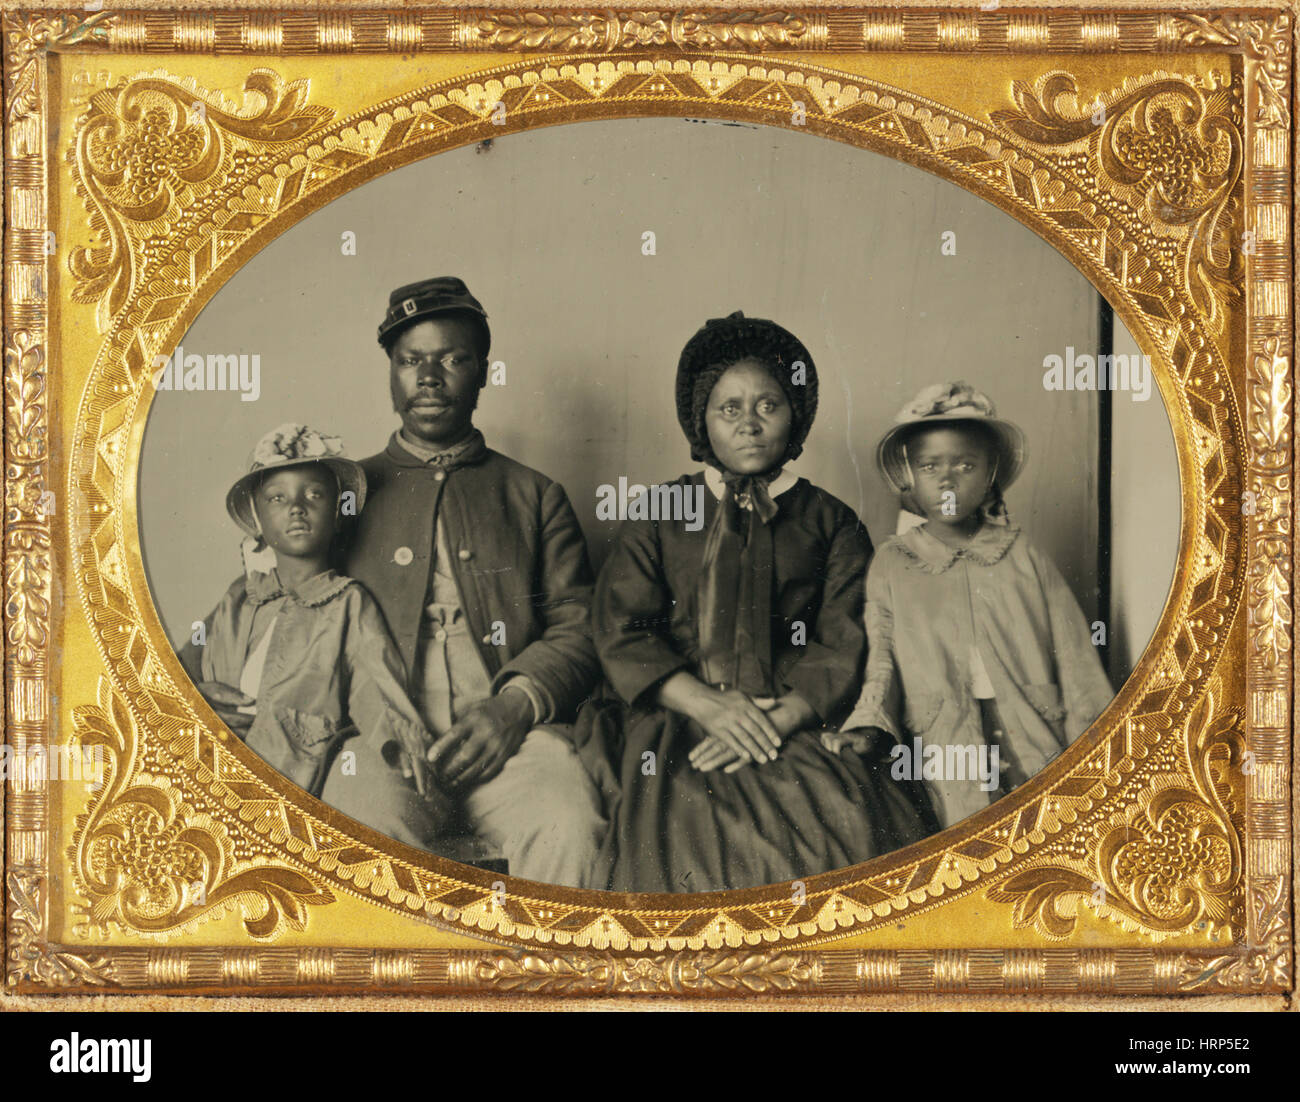 Black Union Soldier and Family, Civil War, c. 1863 Stock Photo